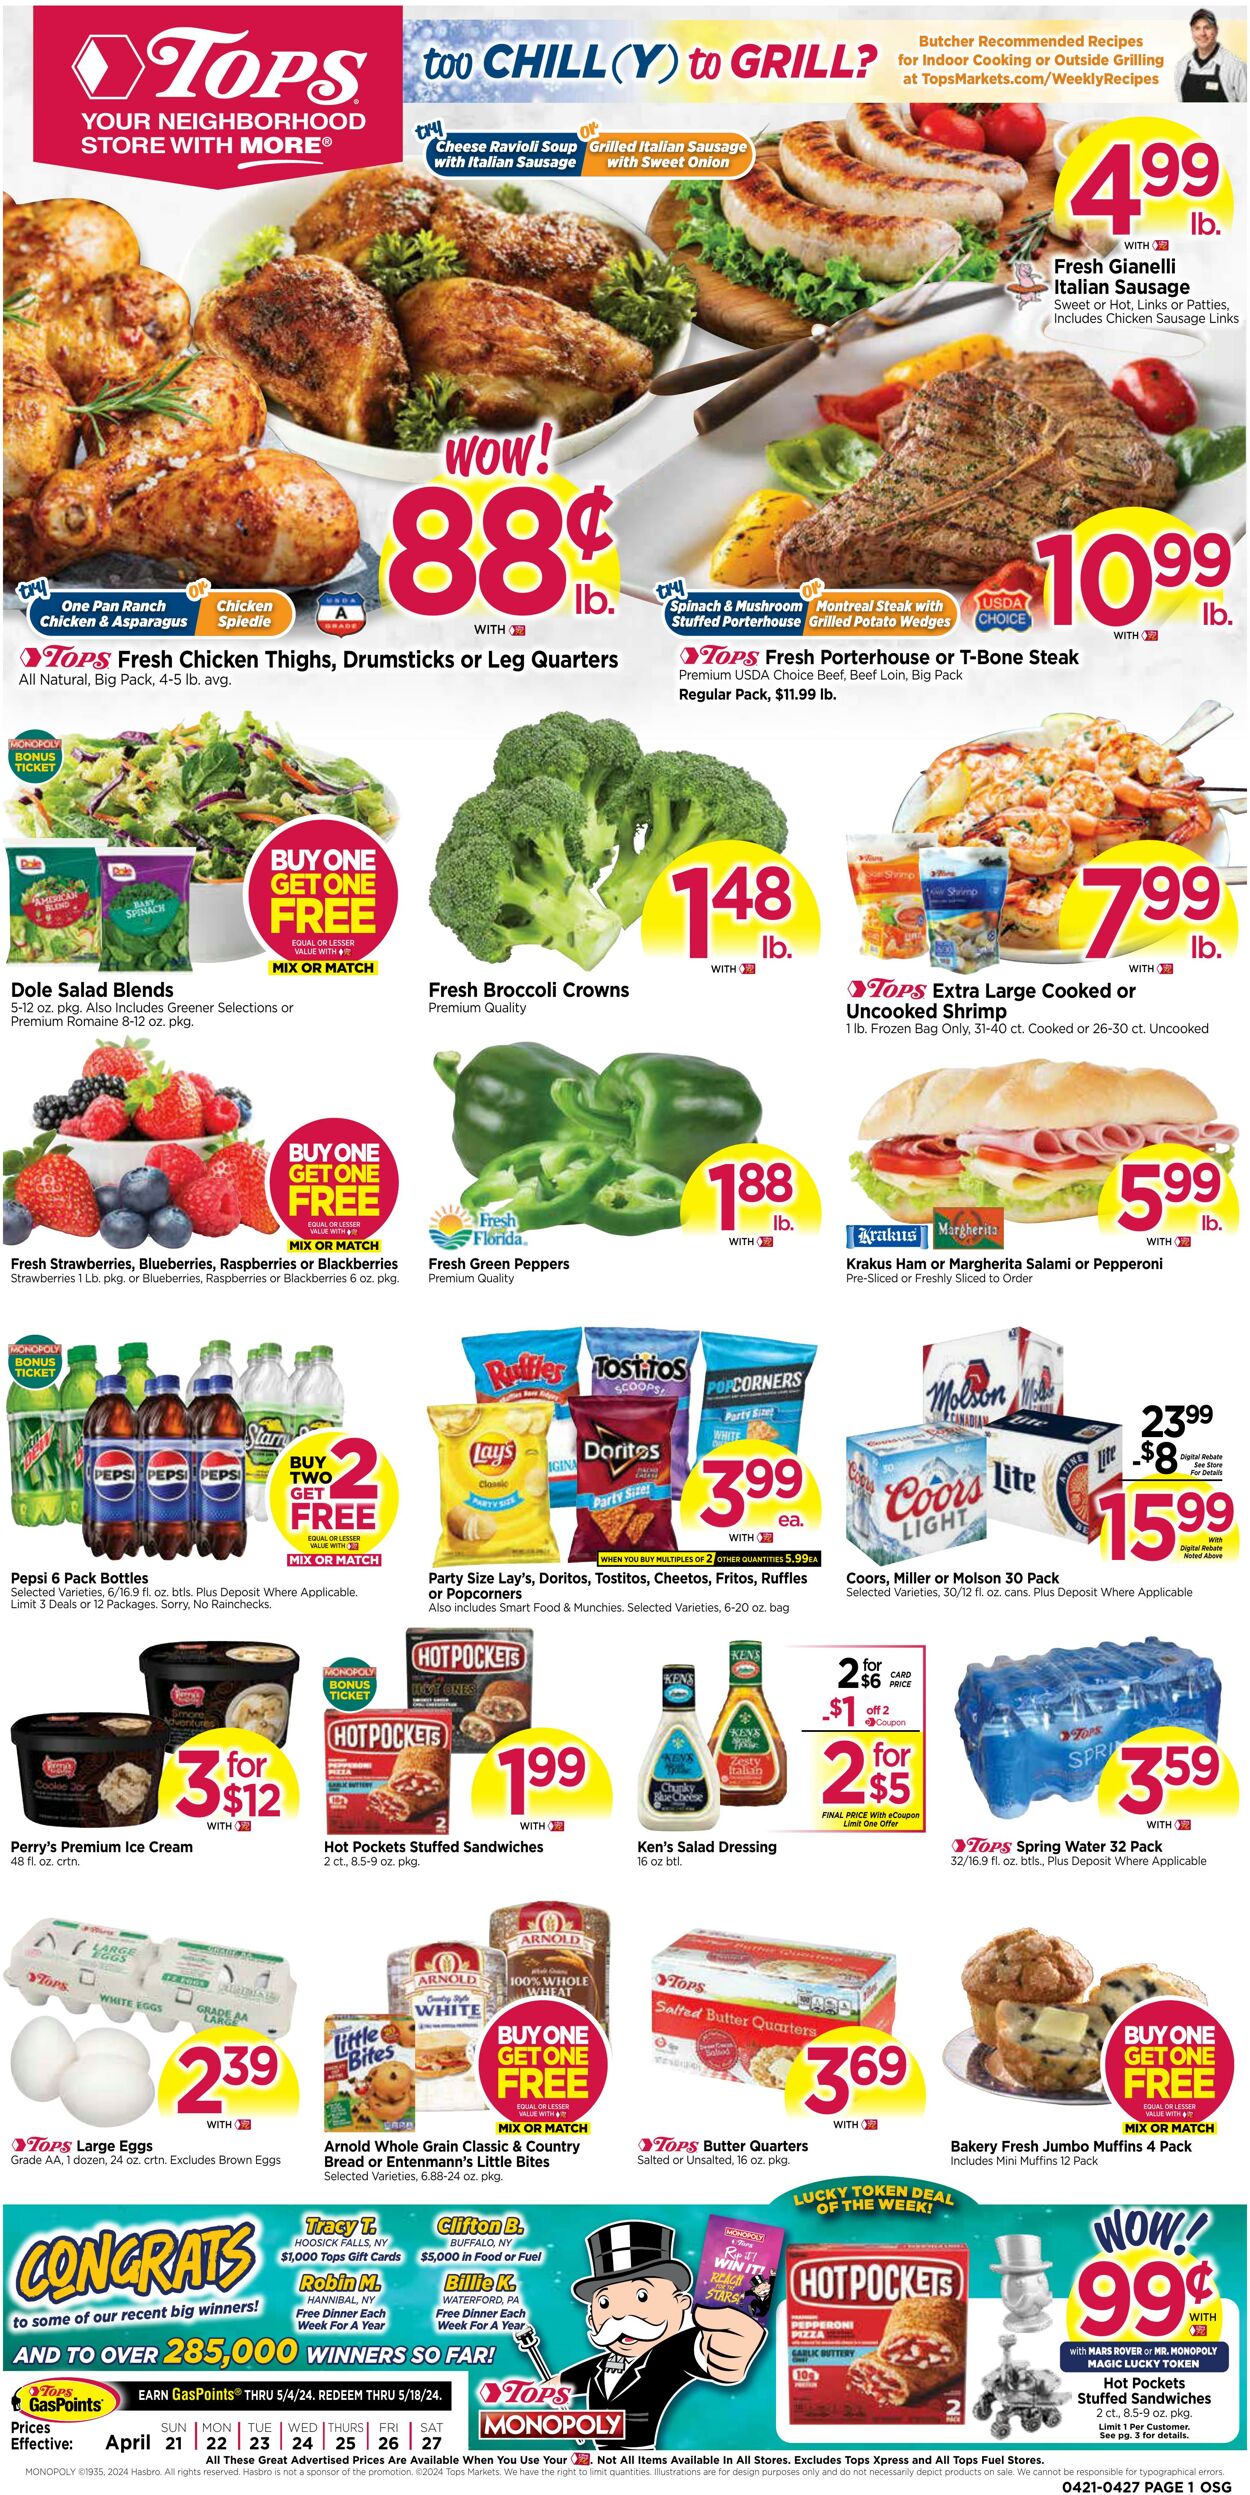 Tops Friendly Markets Promotional weekly ads